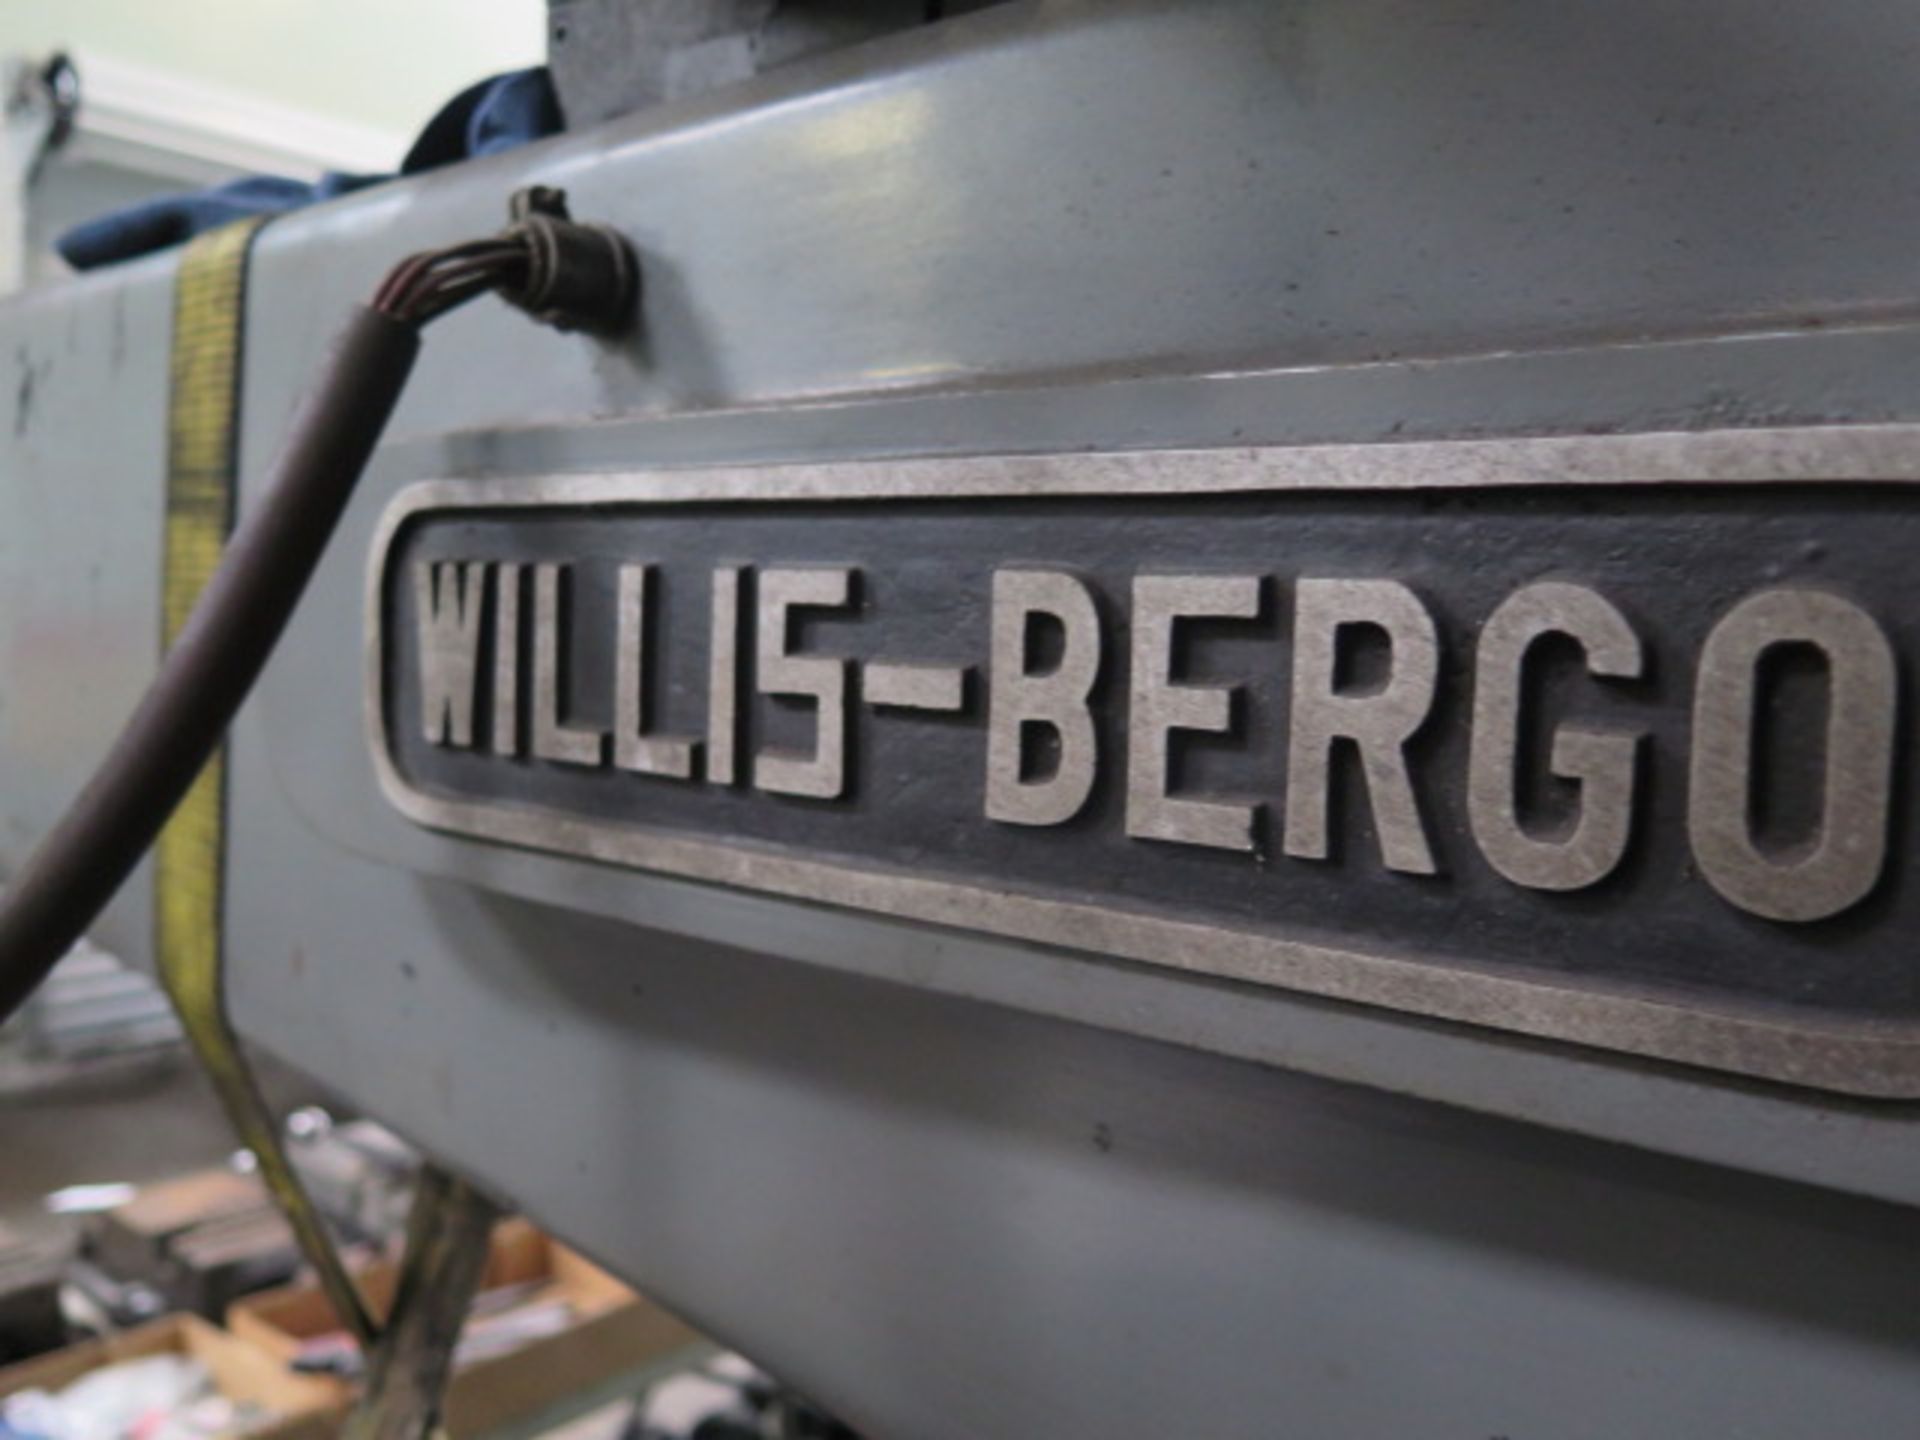 Willis-Bergo FS-1000 8” Column x 24” Radial Arm Drill w/ Power Column and Feeds, SOLD AS IS - Image 10 of 10